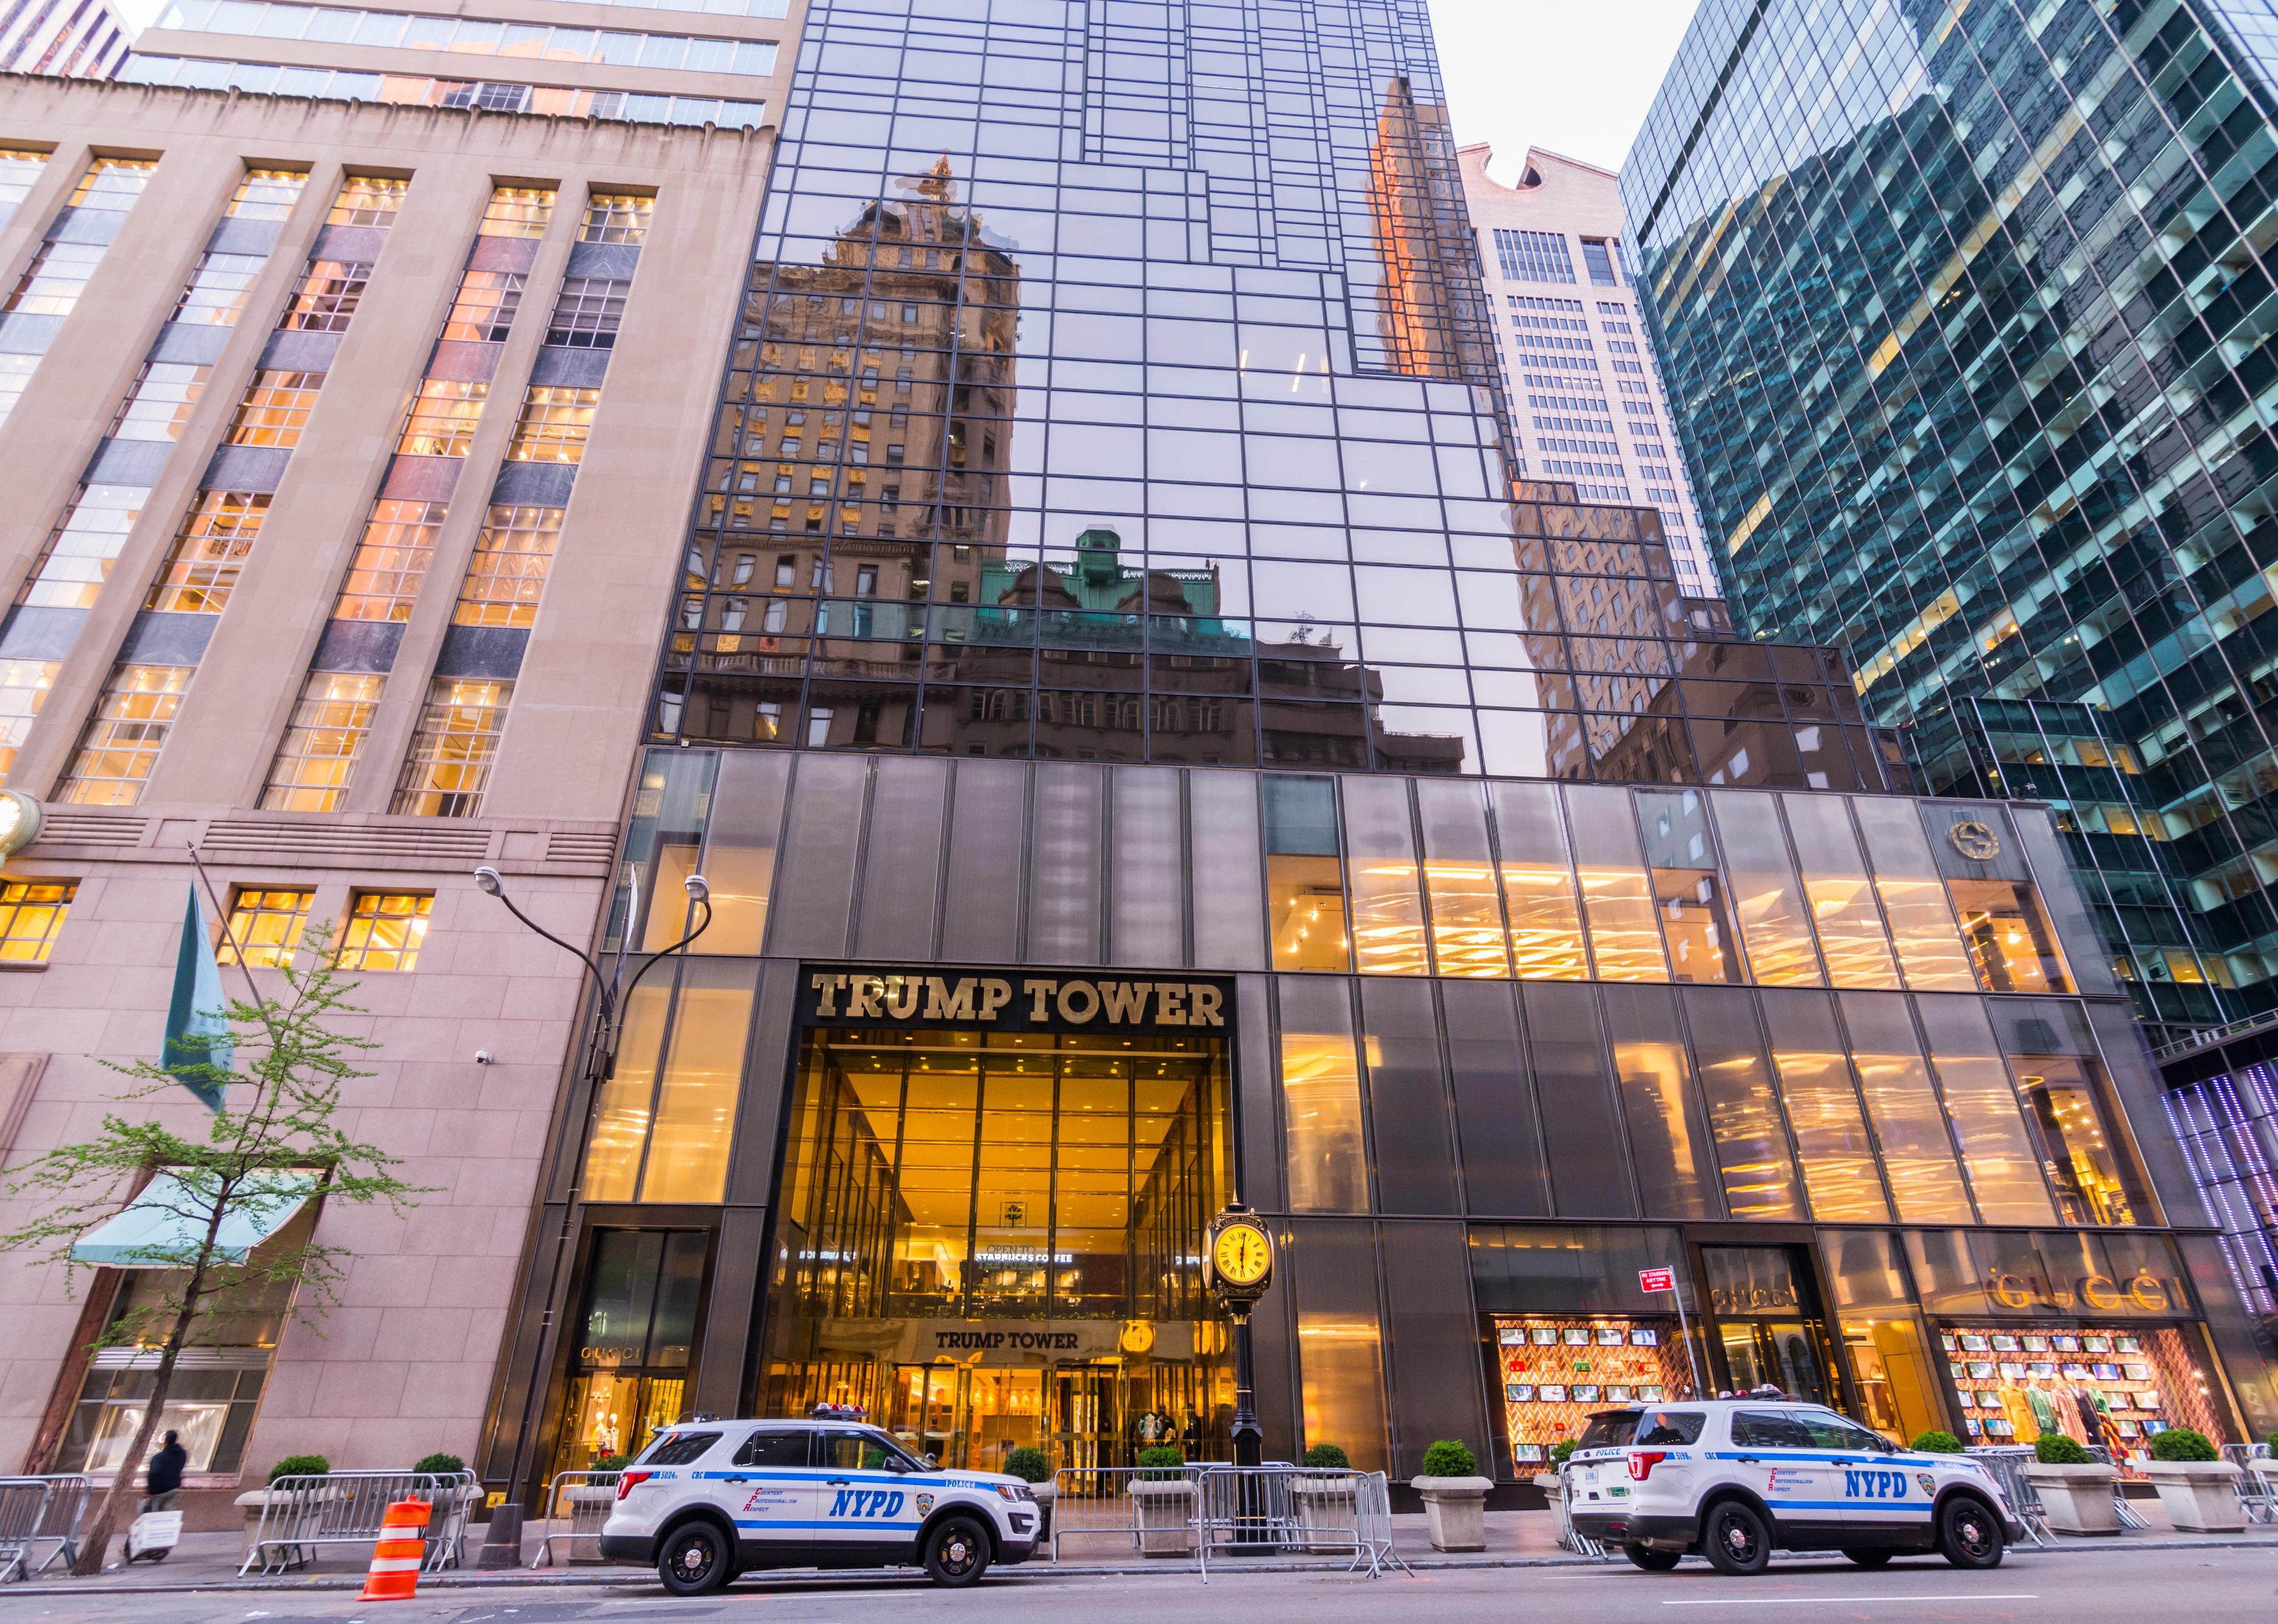 Awning of the Trump Tower on 5th avenue in New York